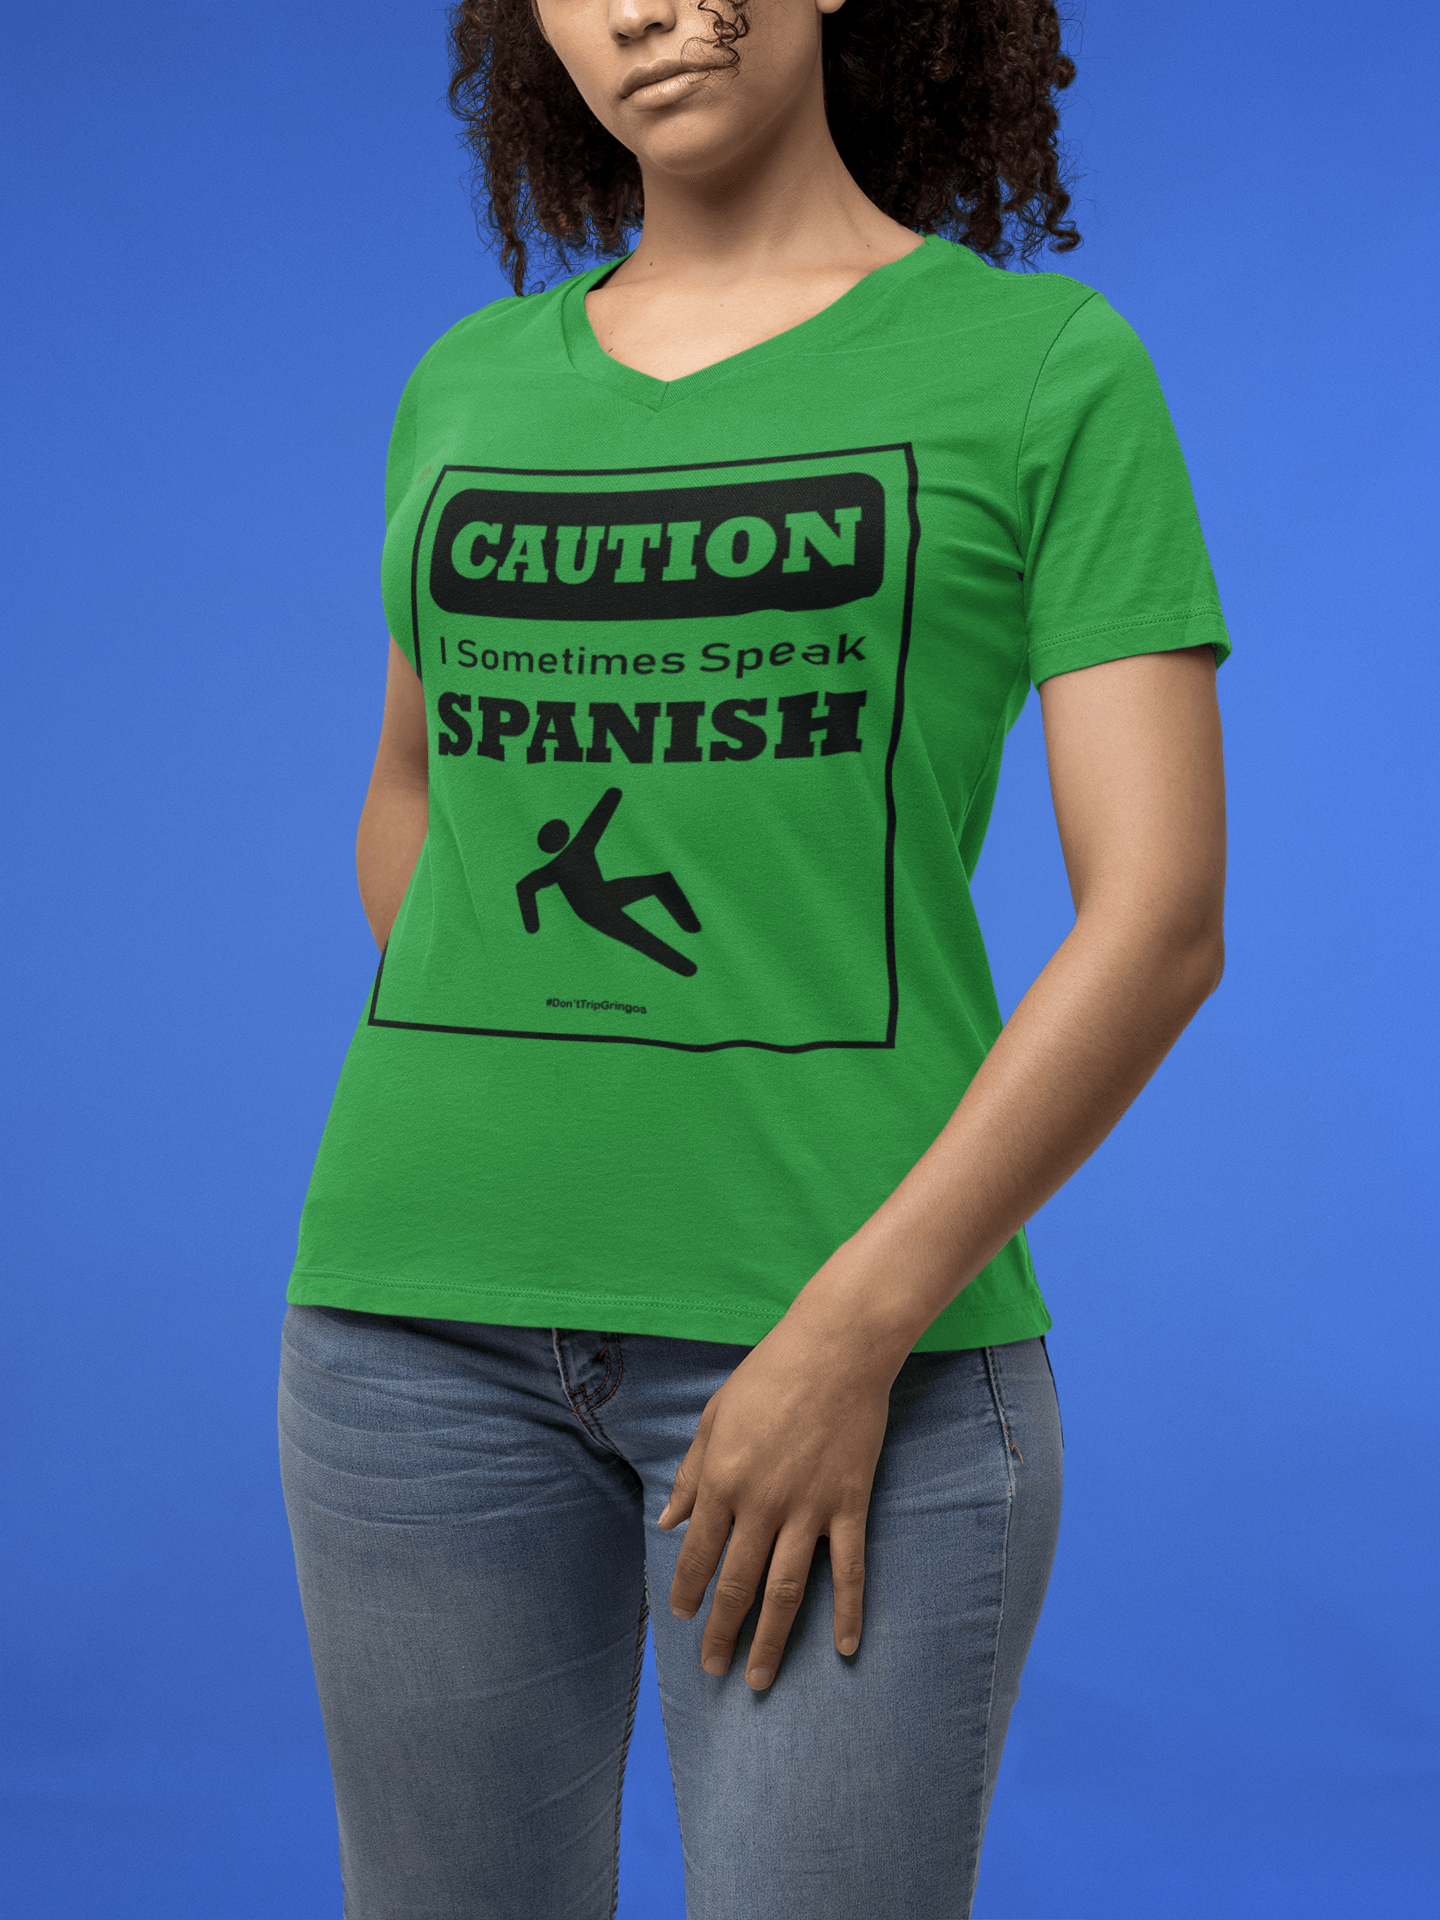 Green V-Neck t-shirt with black text and design that reads, "Caution I sometimes speak Spanish #Don'tTripGringos " in a caution sign layout. It is available in sizes SM-3XL at www.sanchezhere.com